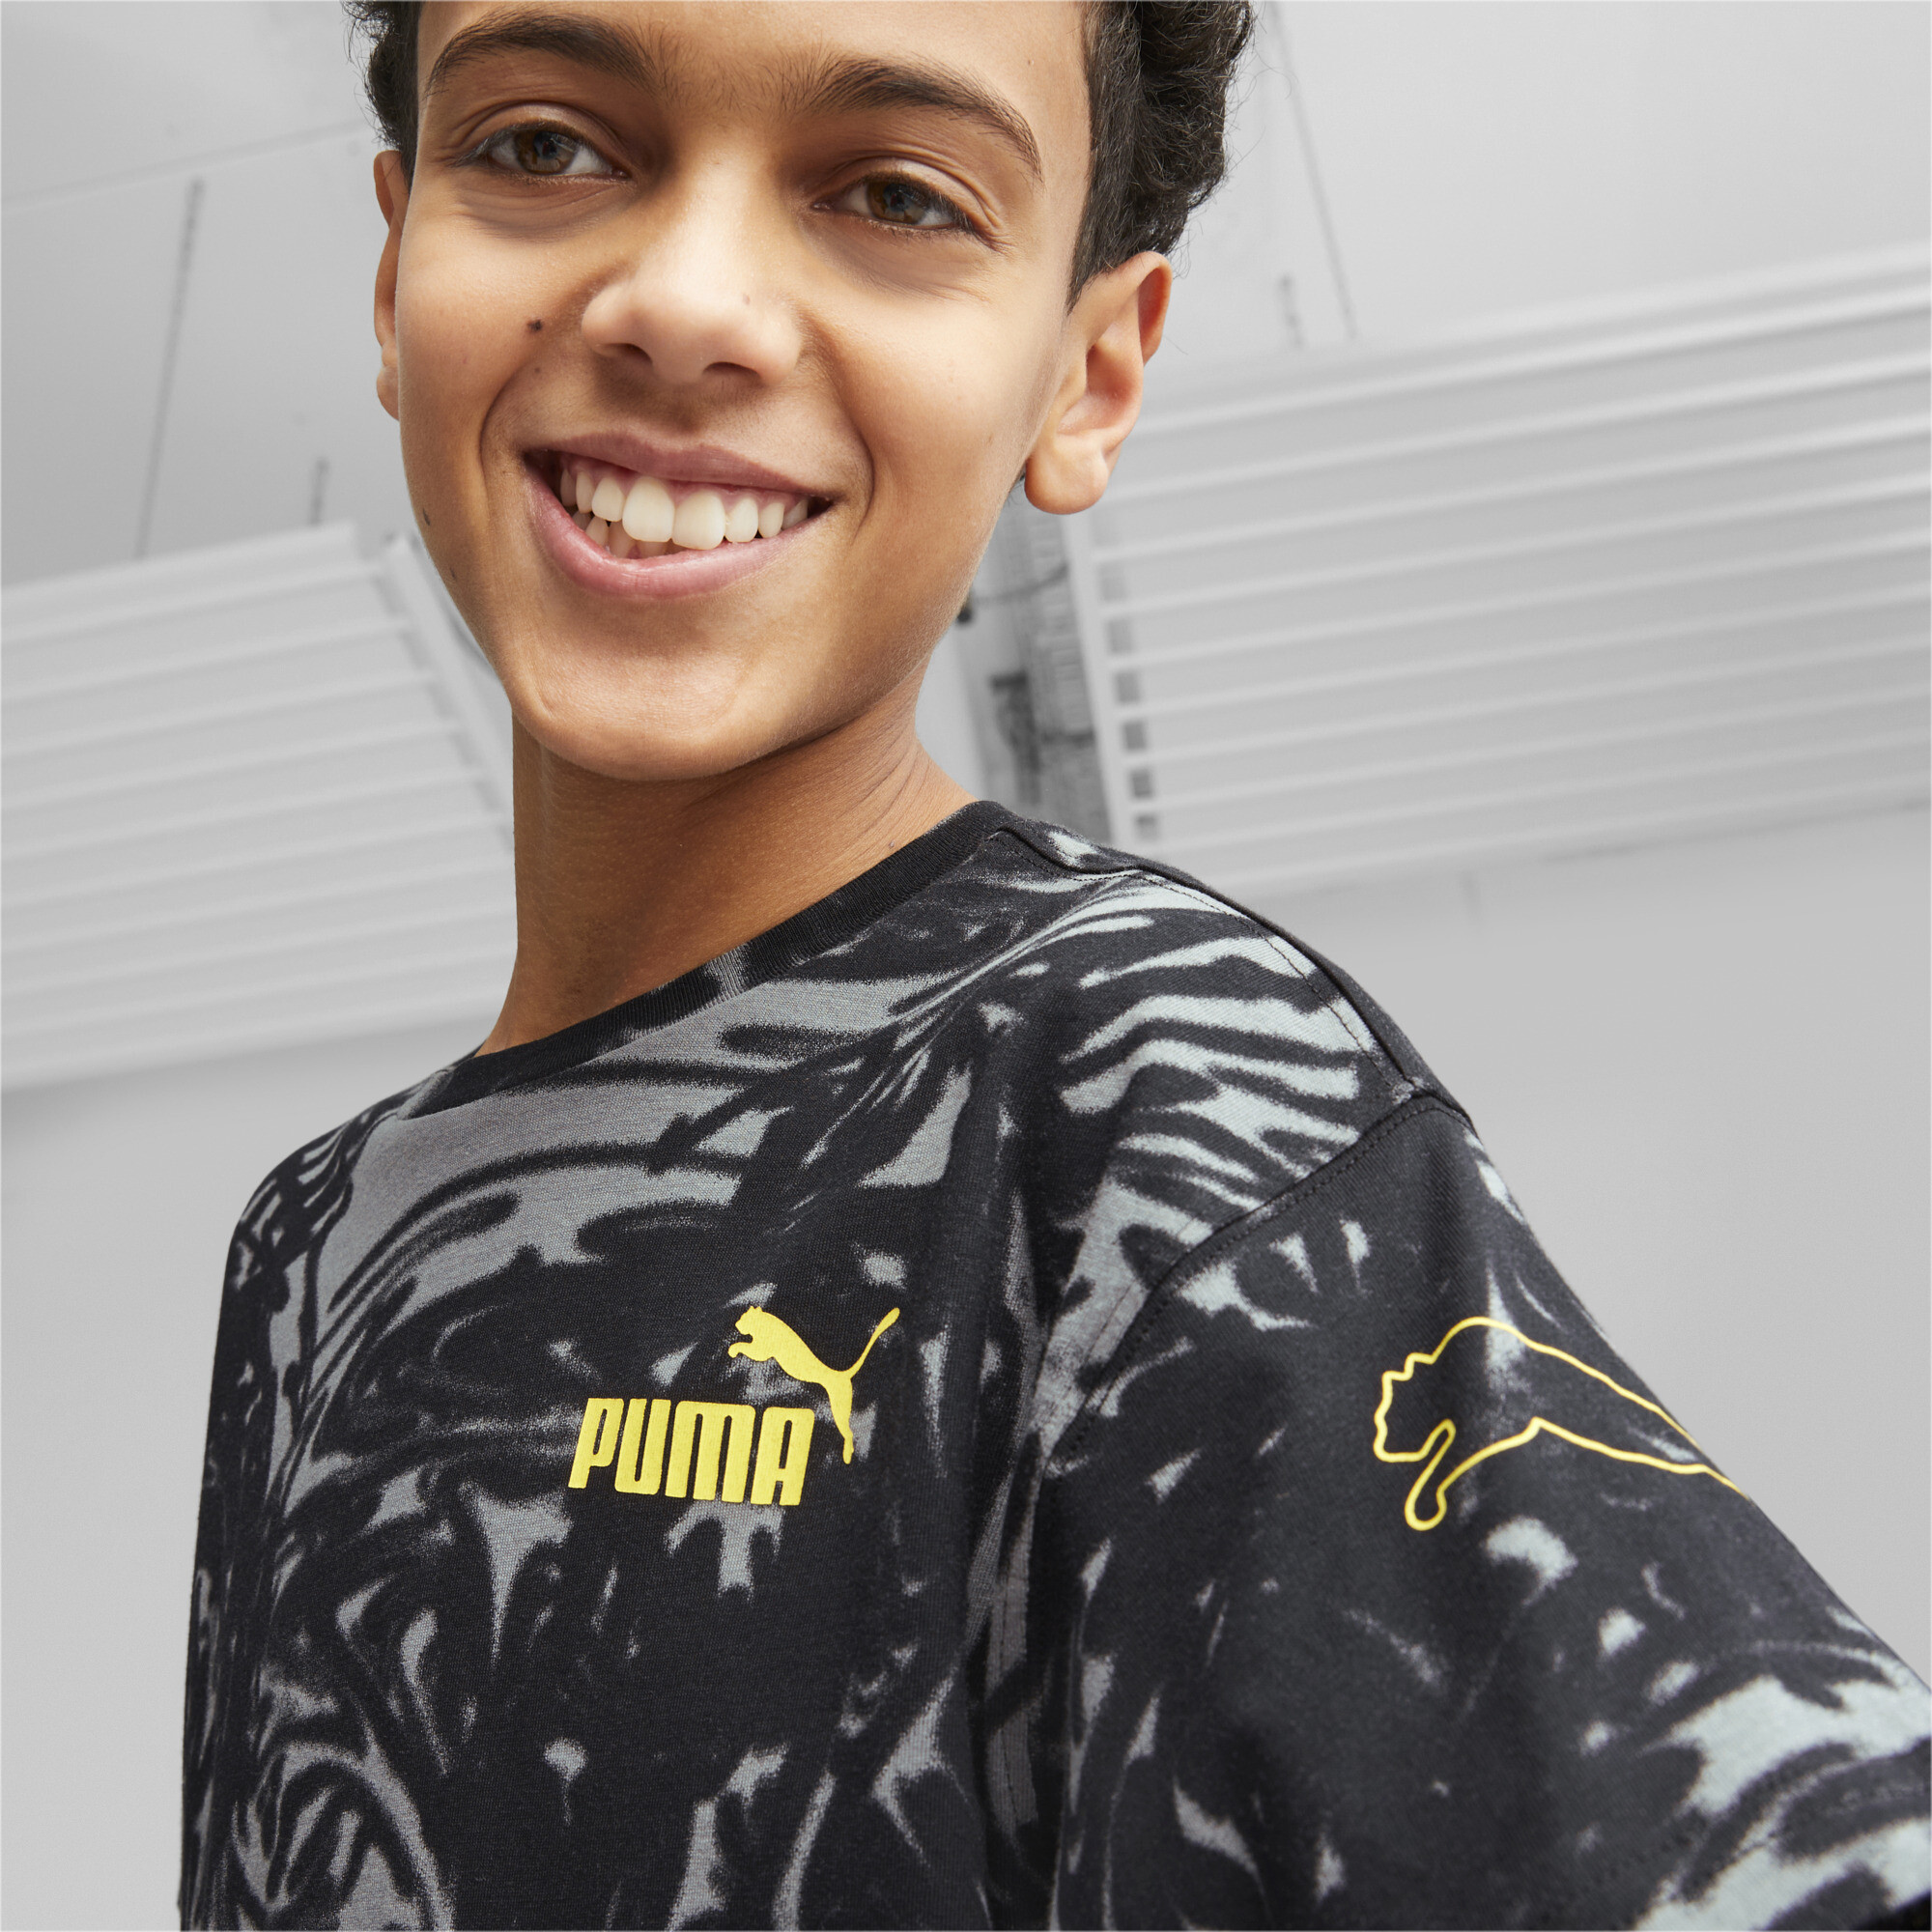 PUMA POWER SUMMER Printed T-Shirt In Black, Size 4-5 Youth